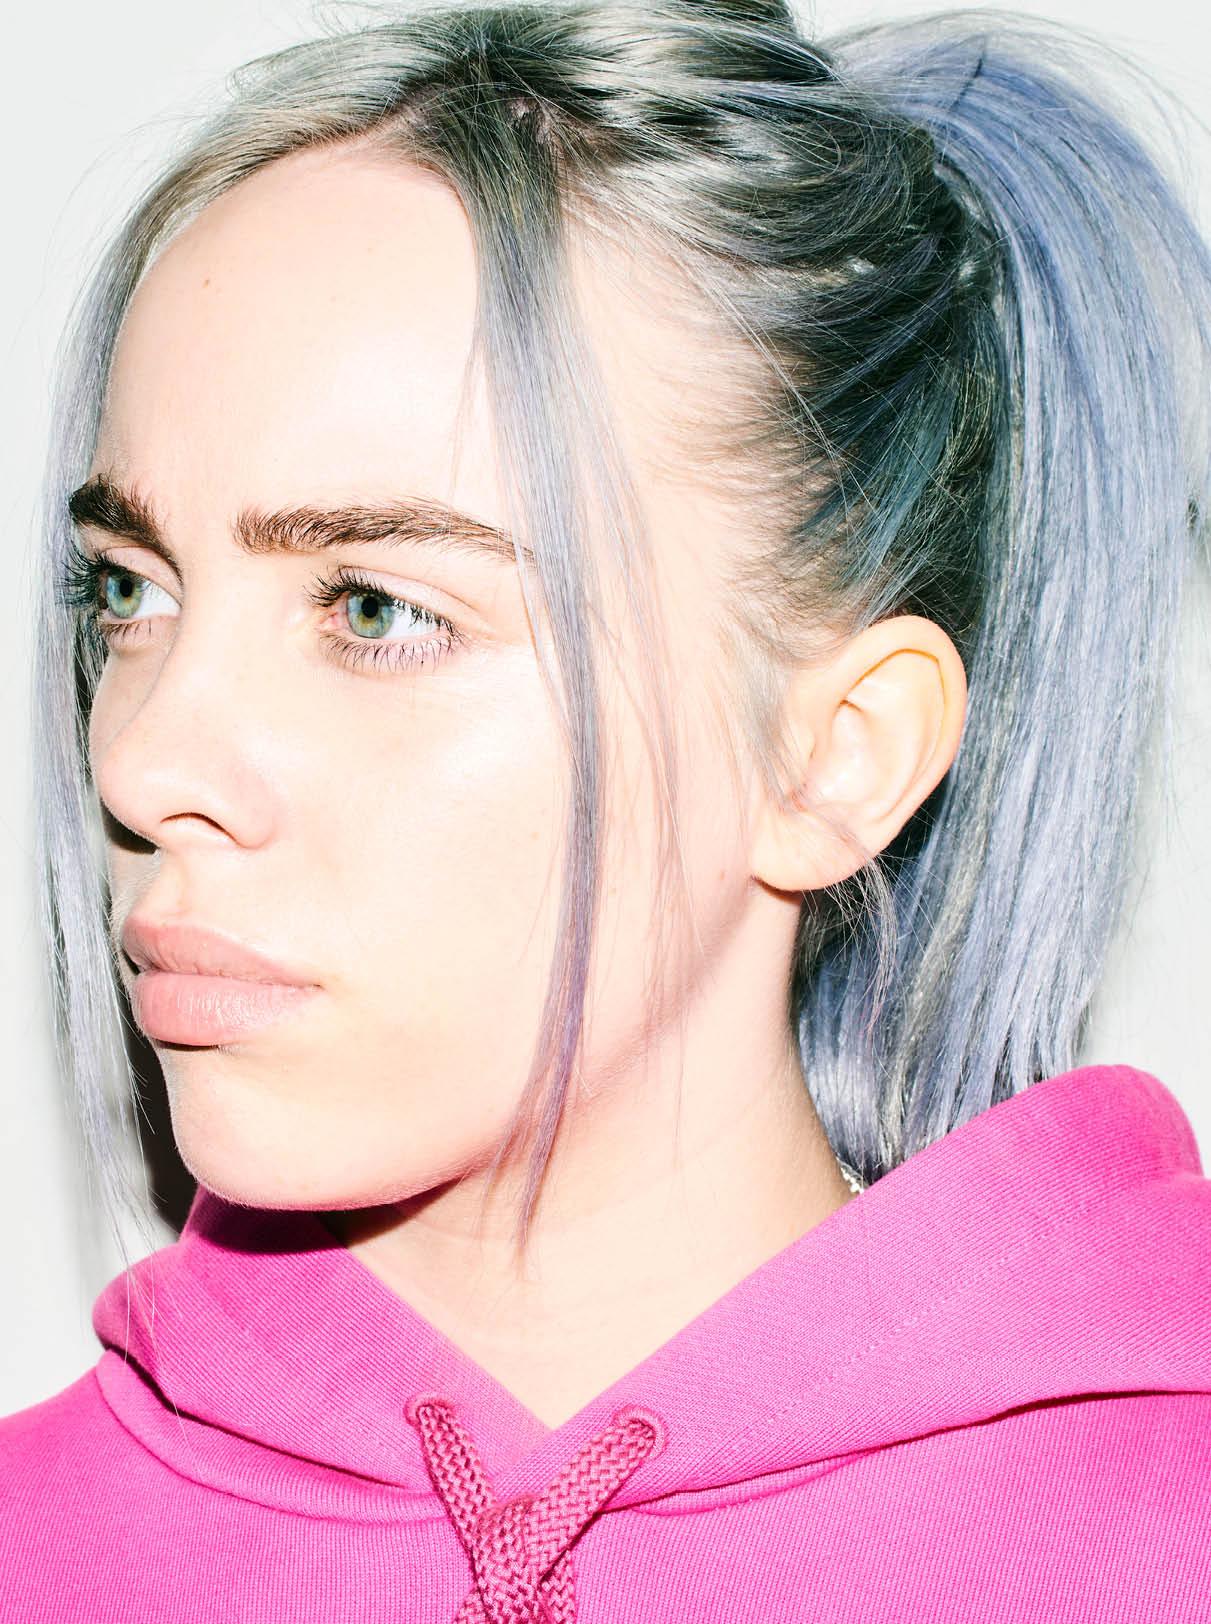 Don't Wanna Be You: Billie Eilish Interviewed. Features